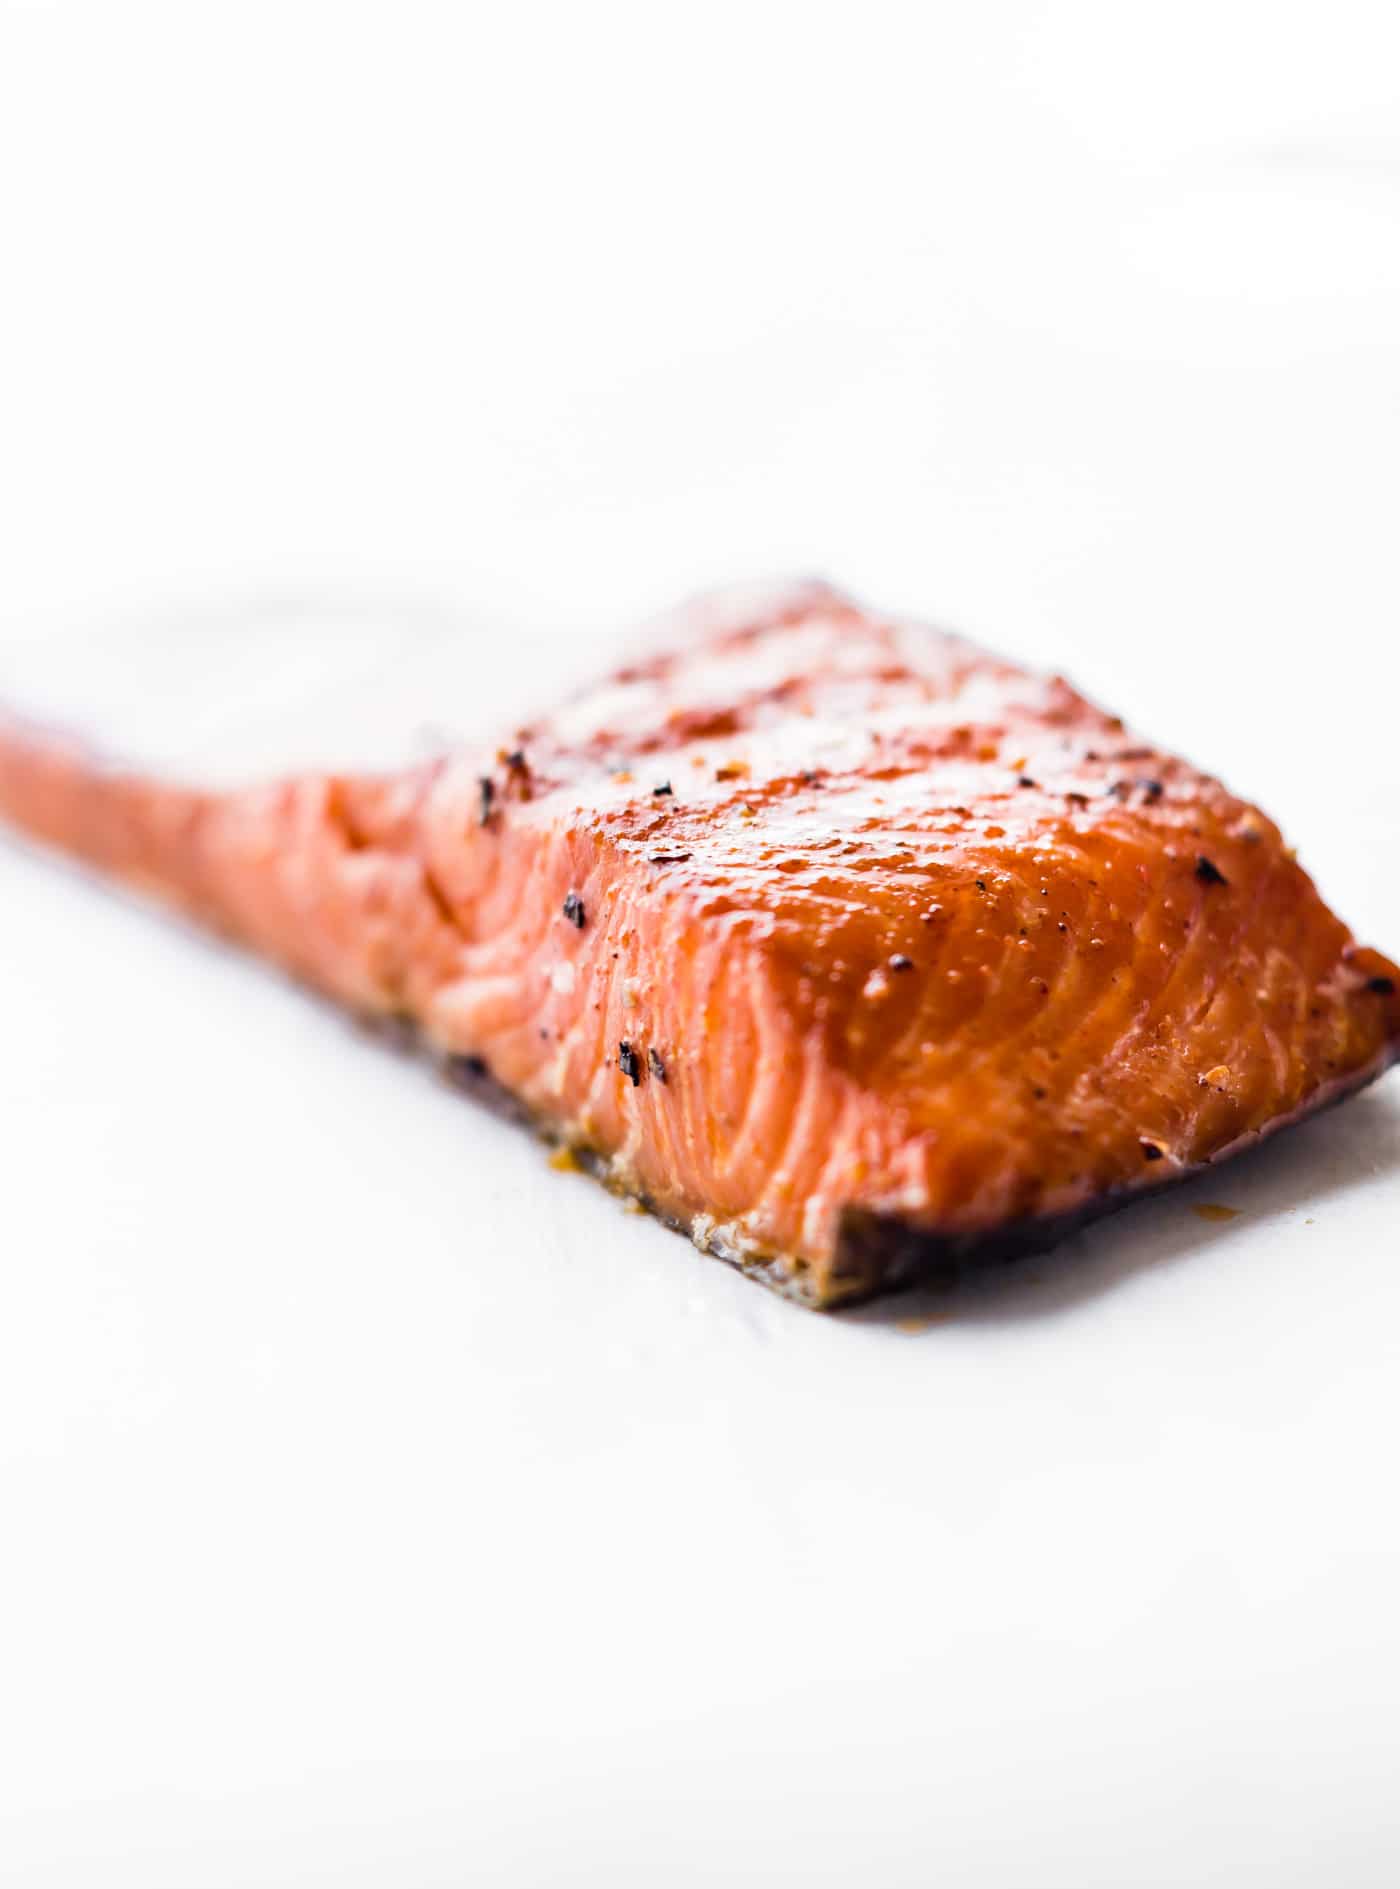 A piece of smoked salmon with a white background